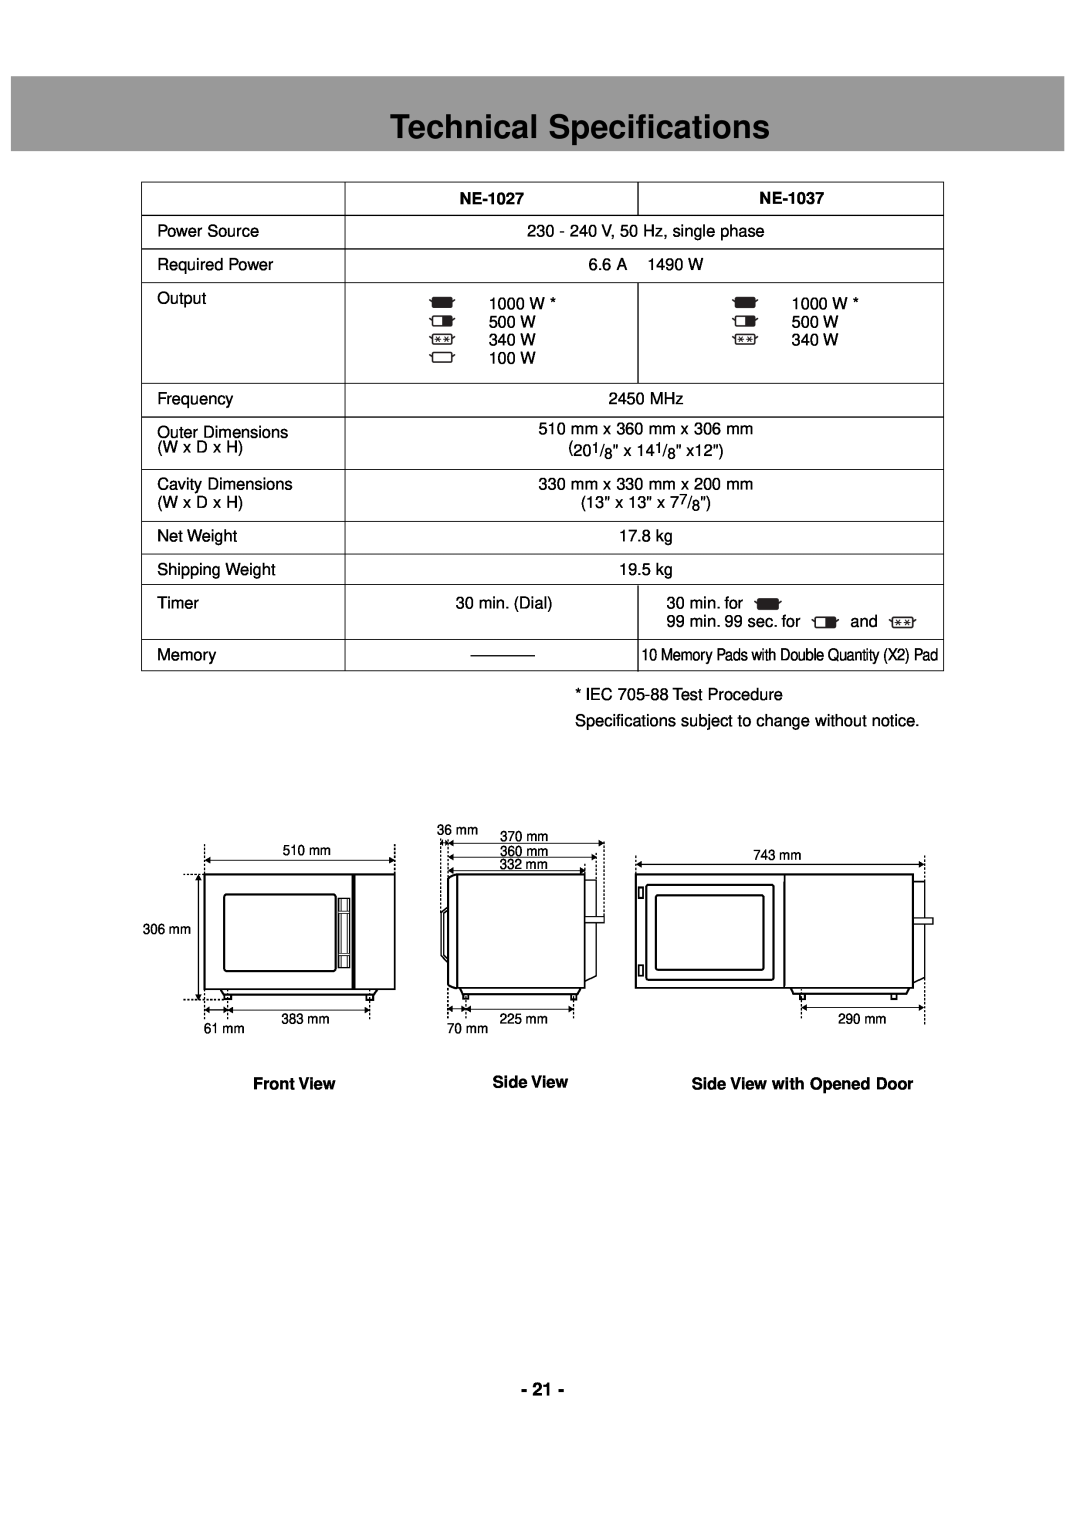 LG Electronics NE-1037 operating instructions Technical Specifications, NE-1027, Front View, Side View with Opened Door 